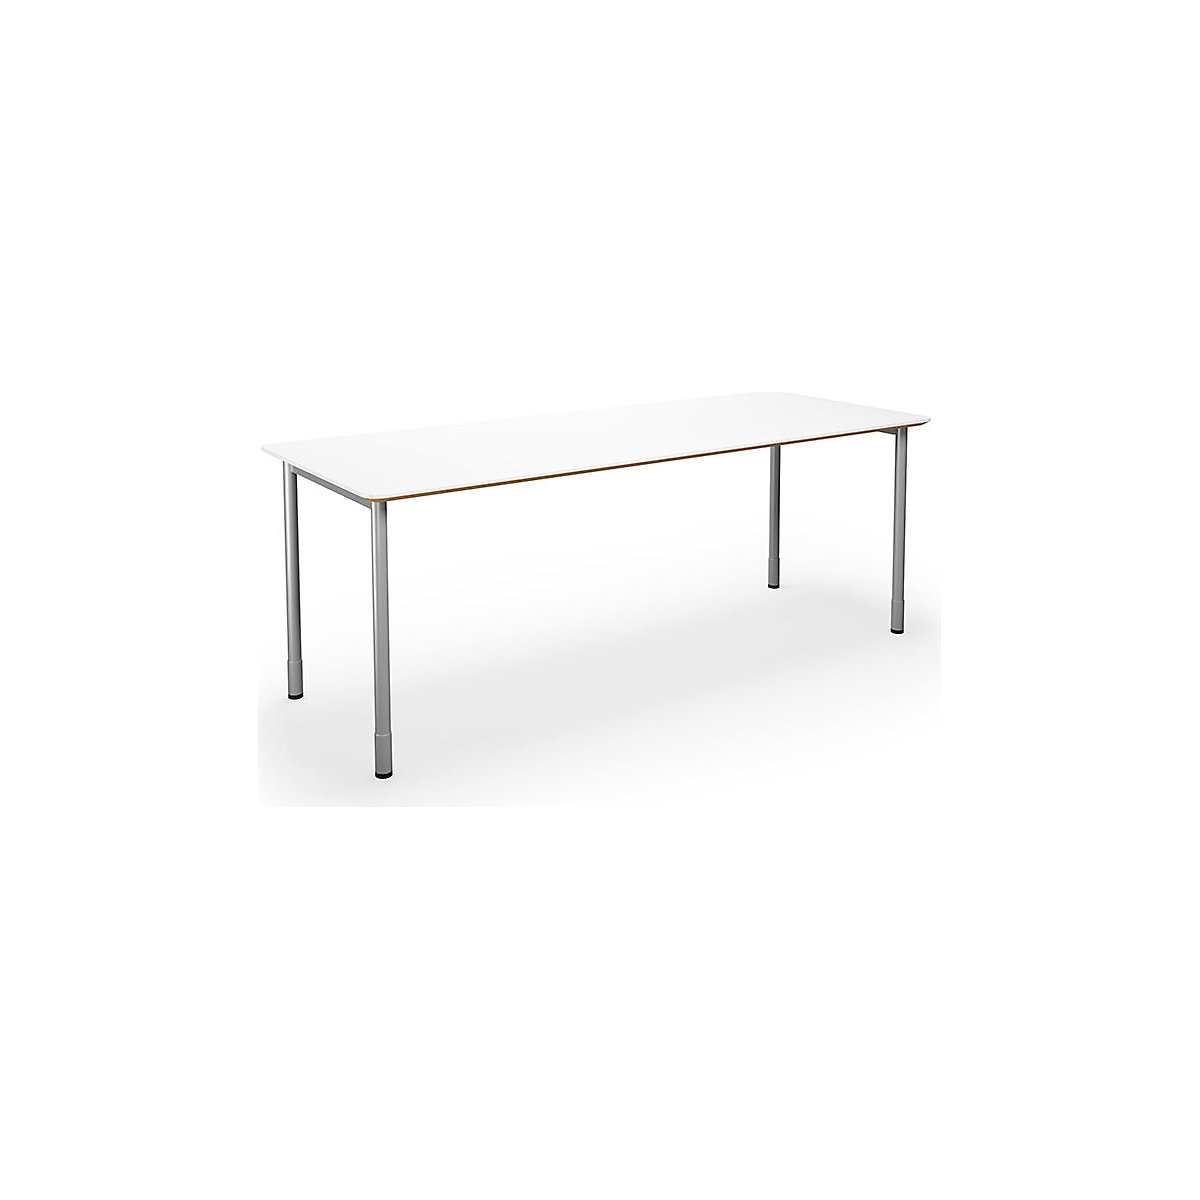 DUO-C Trend multi-purpose desk, straight tabletop, rounded corners, WxD 2000 x 800 mm, white, silver-2